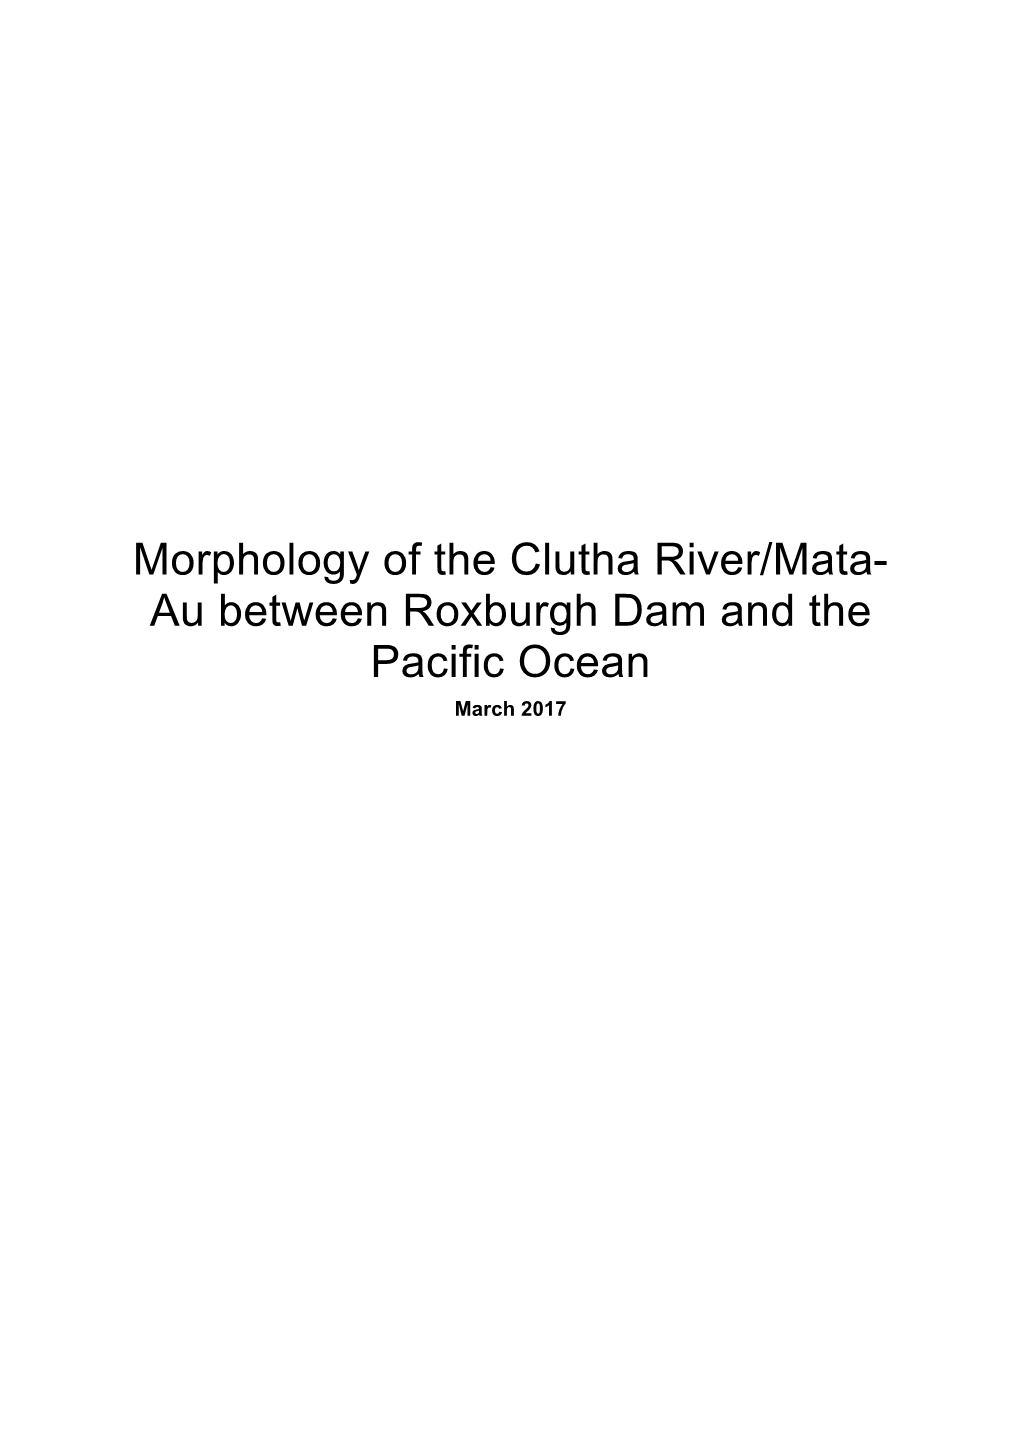 Morphology of the Clutha River/Mata- Au Between Roxburgh Dam and the Pacific Ocean March 2017